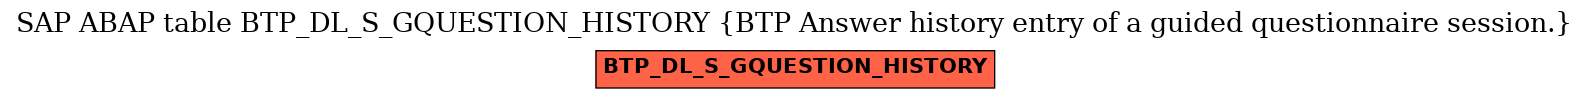 E-R Diagram for table BTP_DL_S_GQUESTION_HISTORY (BTP Answer history entry of a guided questionnaire session.)